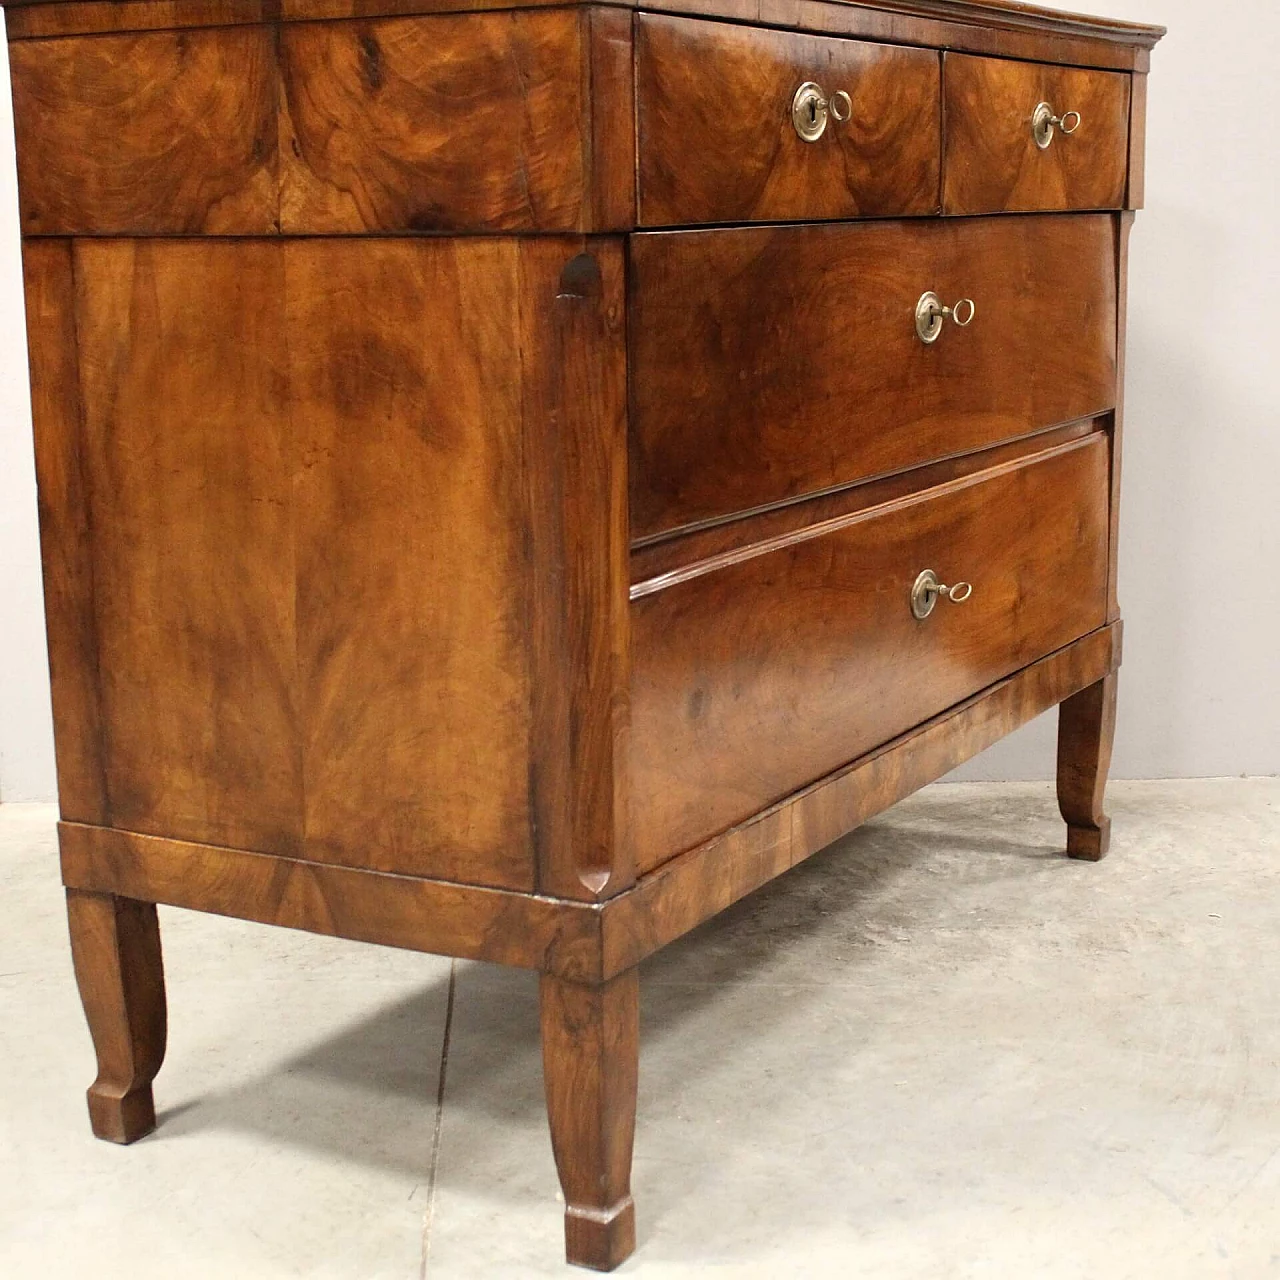 Direttorio chest of drawers in solid walnut and walnut panelling, second half of the 18th century 1